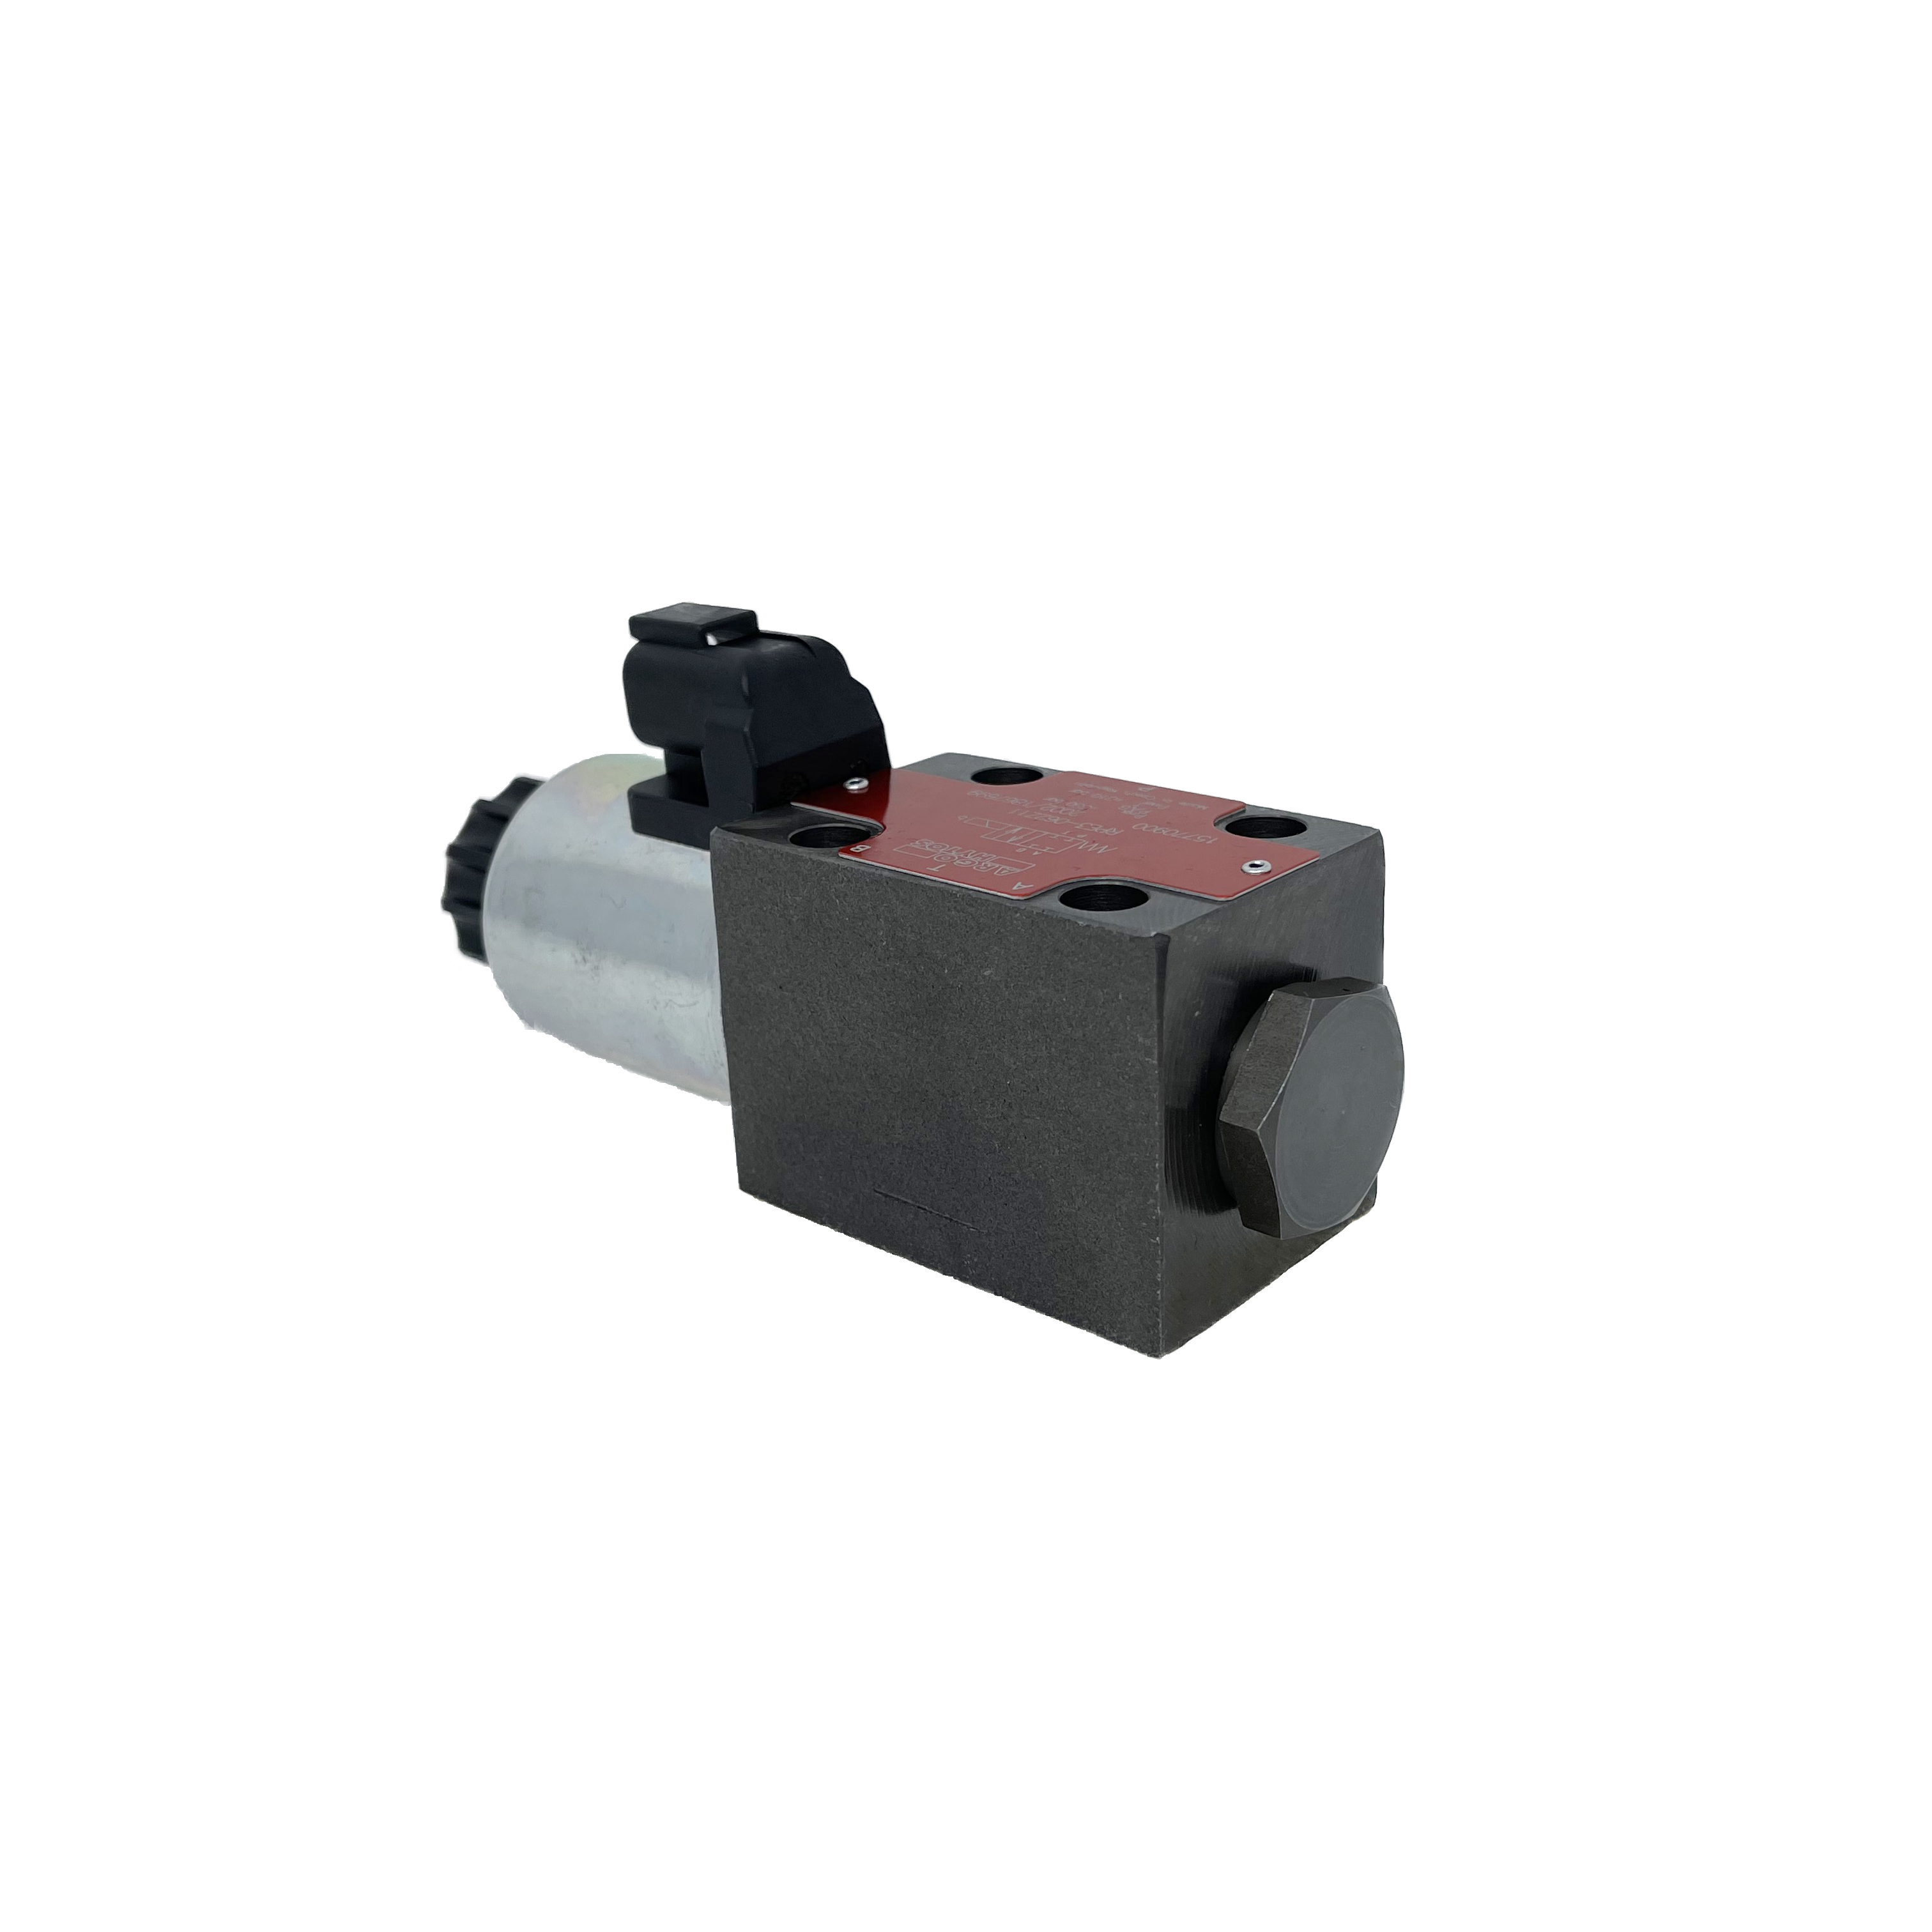 RPE3-062X11/02400E12A : Argo Hytos Directional Control Valve, D03 (NG6), 21GPM, 5100psi, 2P4W, 24 VDC, Deutsch, Spring Return, P to B, A to T in Neutral, Coil Side B